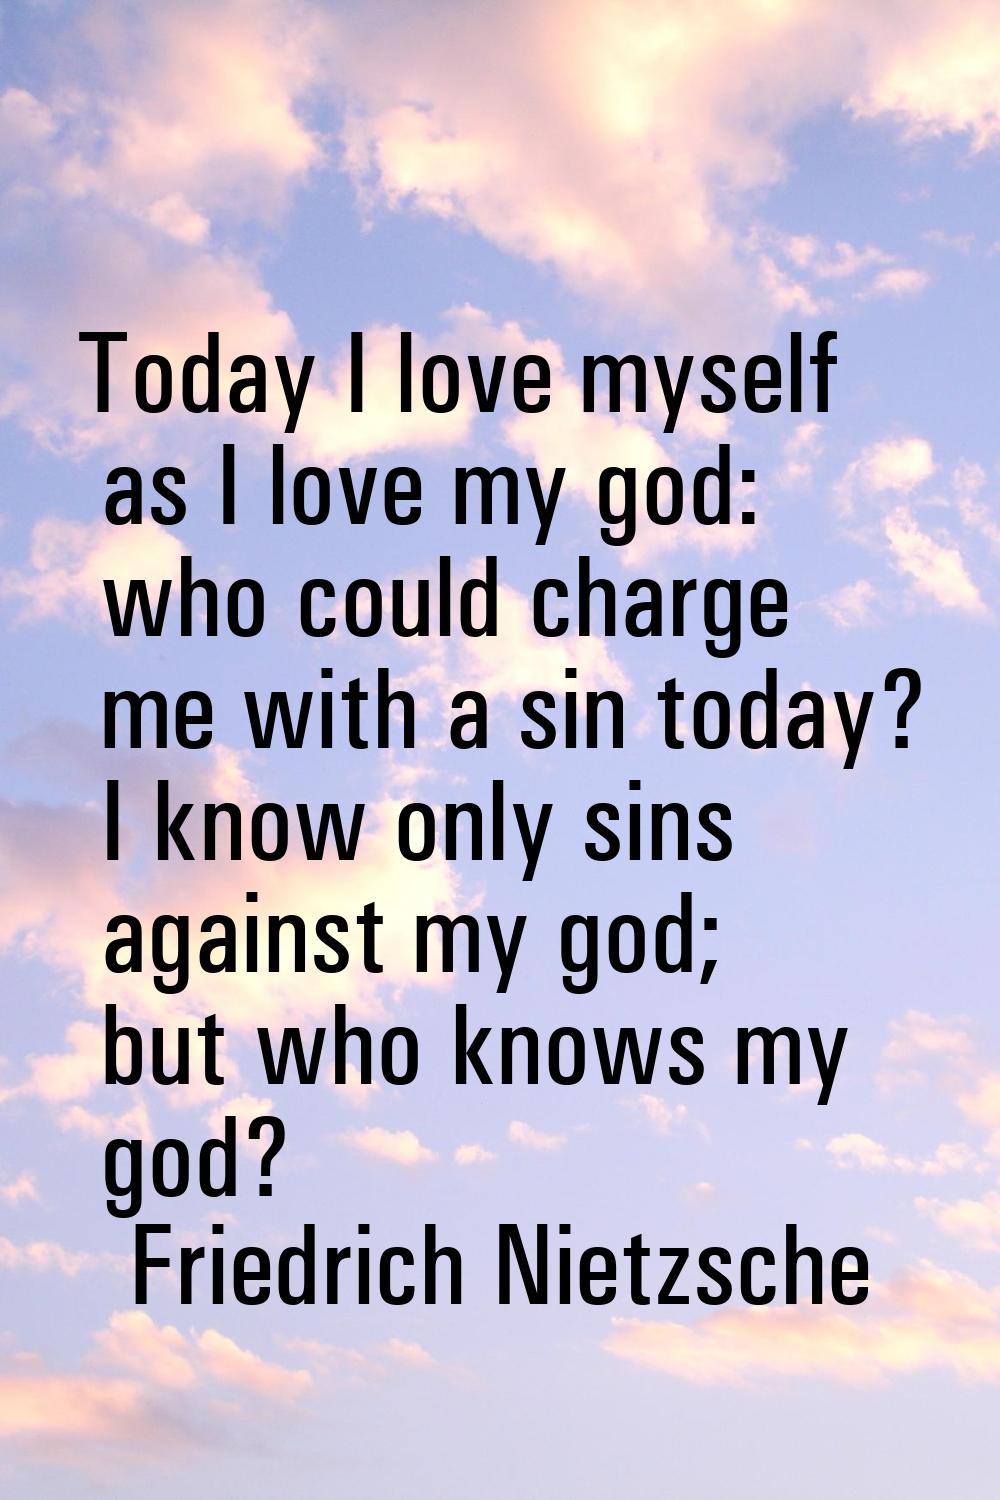 Today I love myself as I love my god: who could charge me with a sin today? I know only sins agains